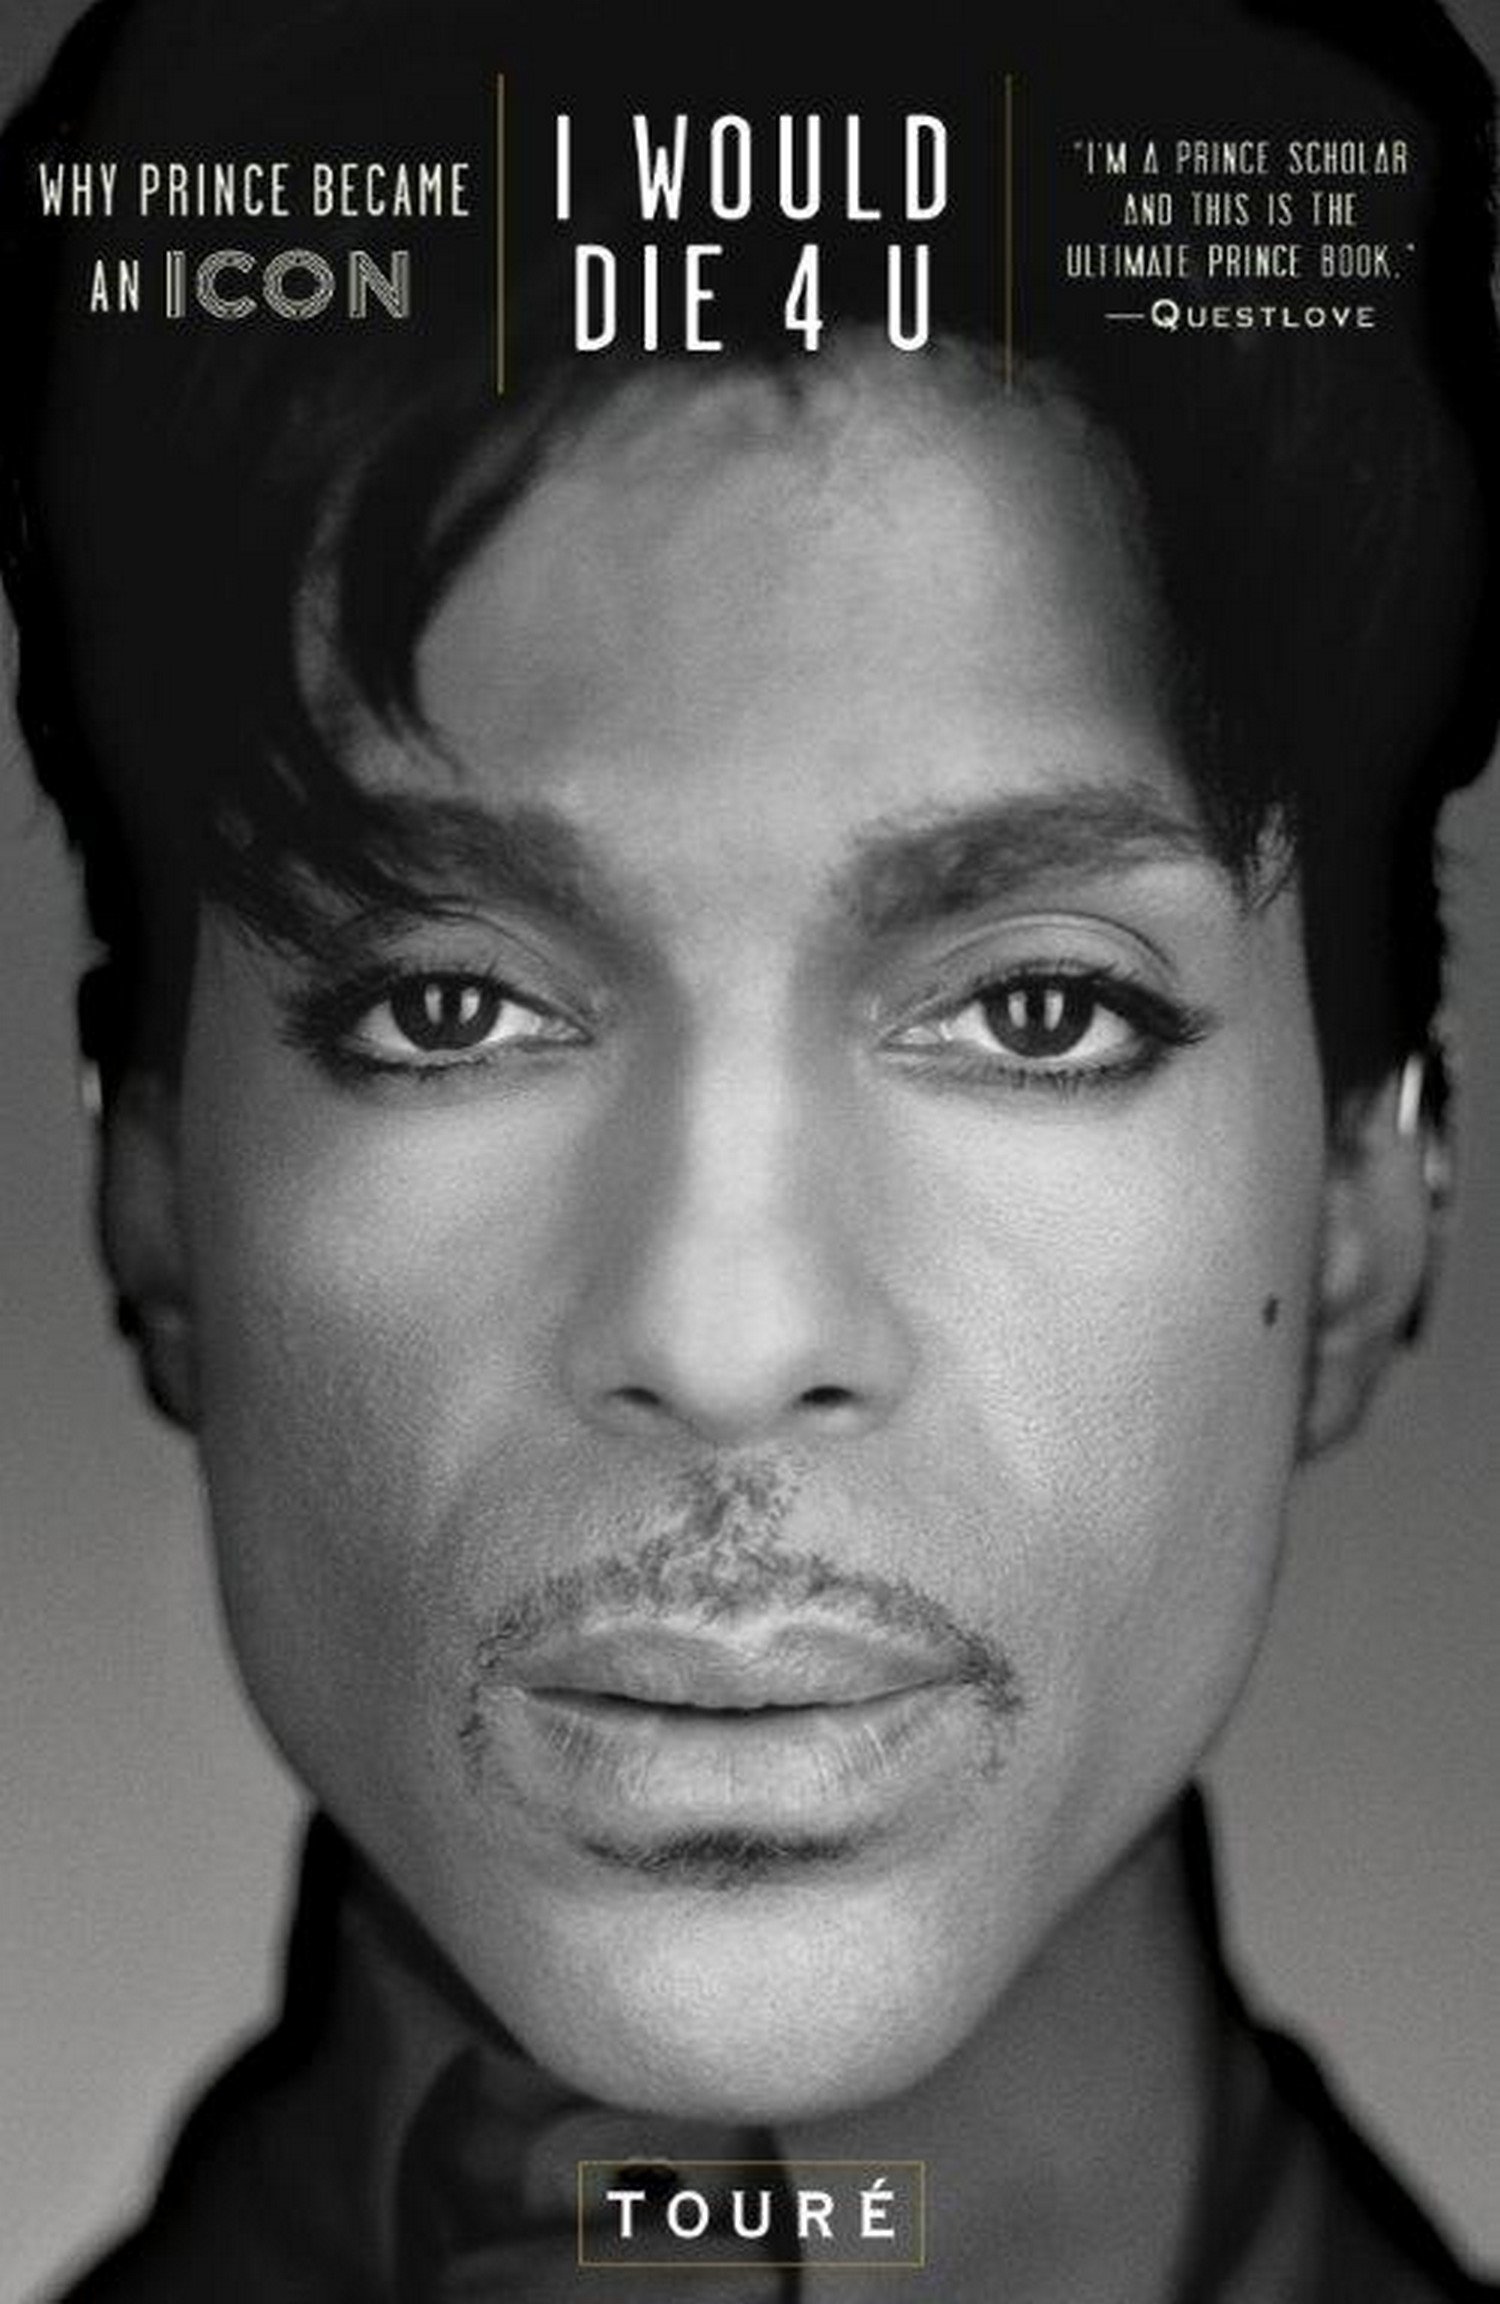 I would die 4 u :  why Prince became an icon